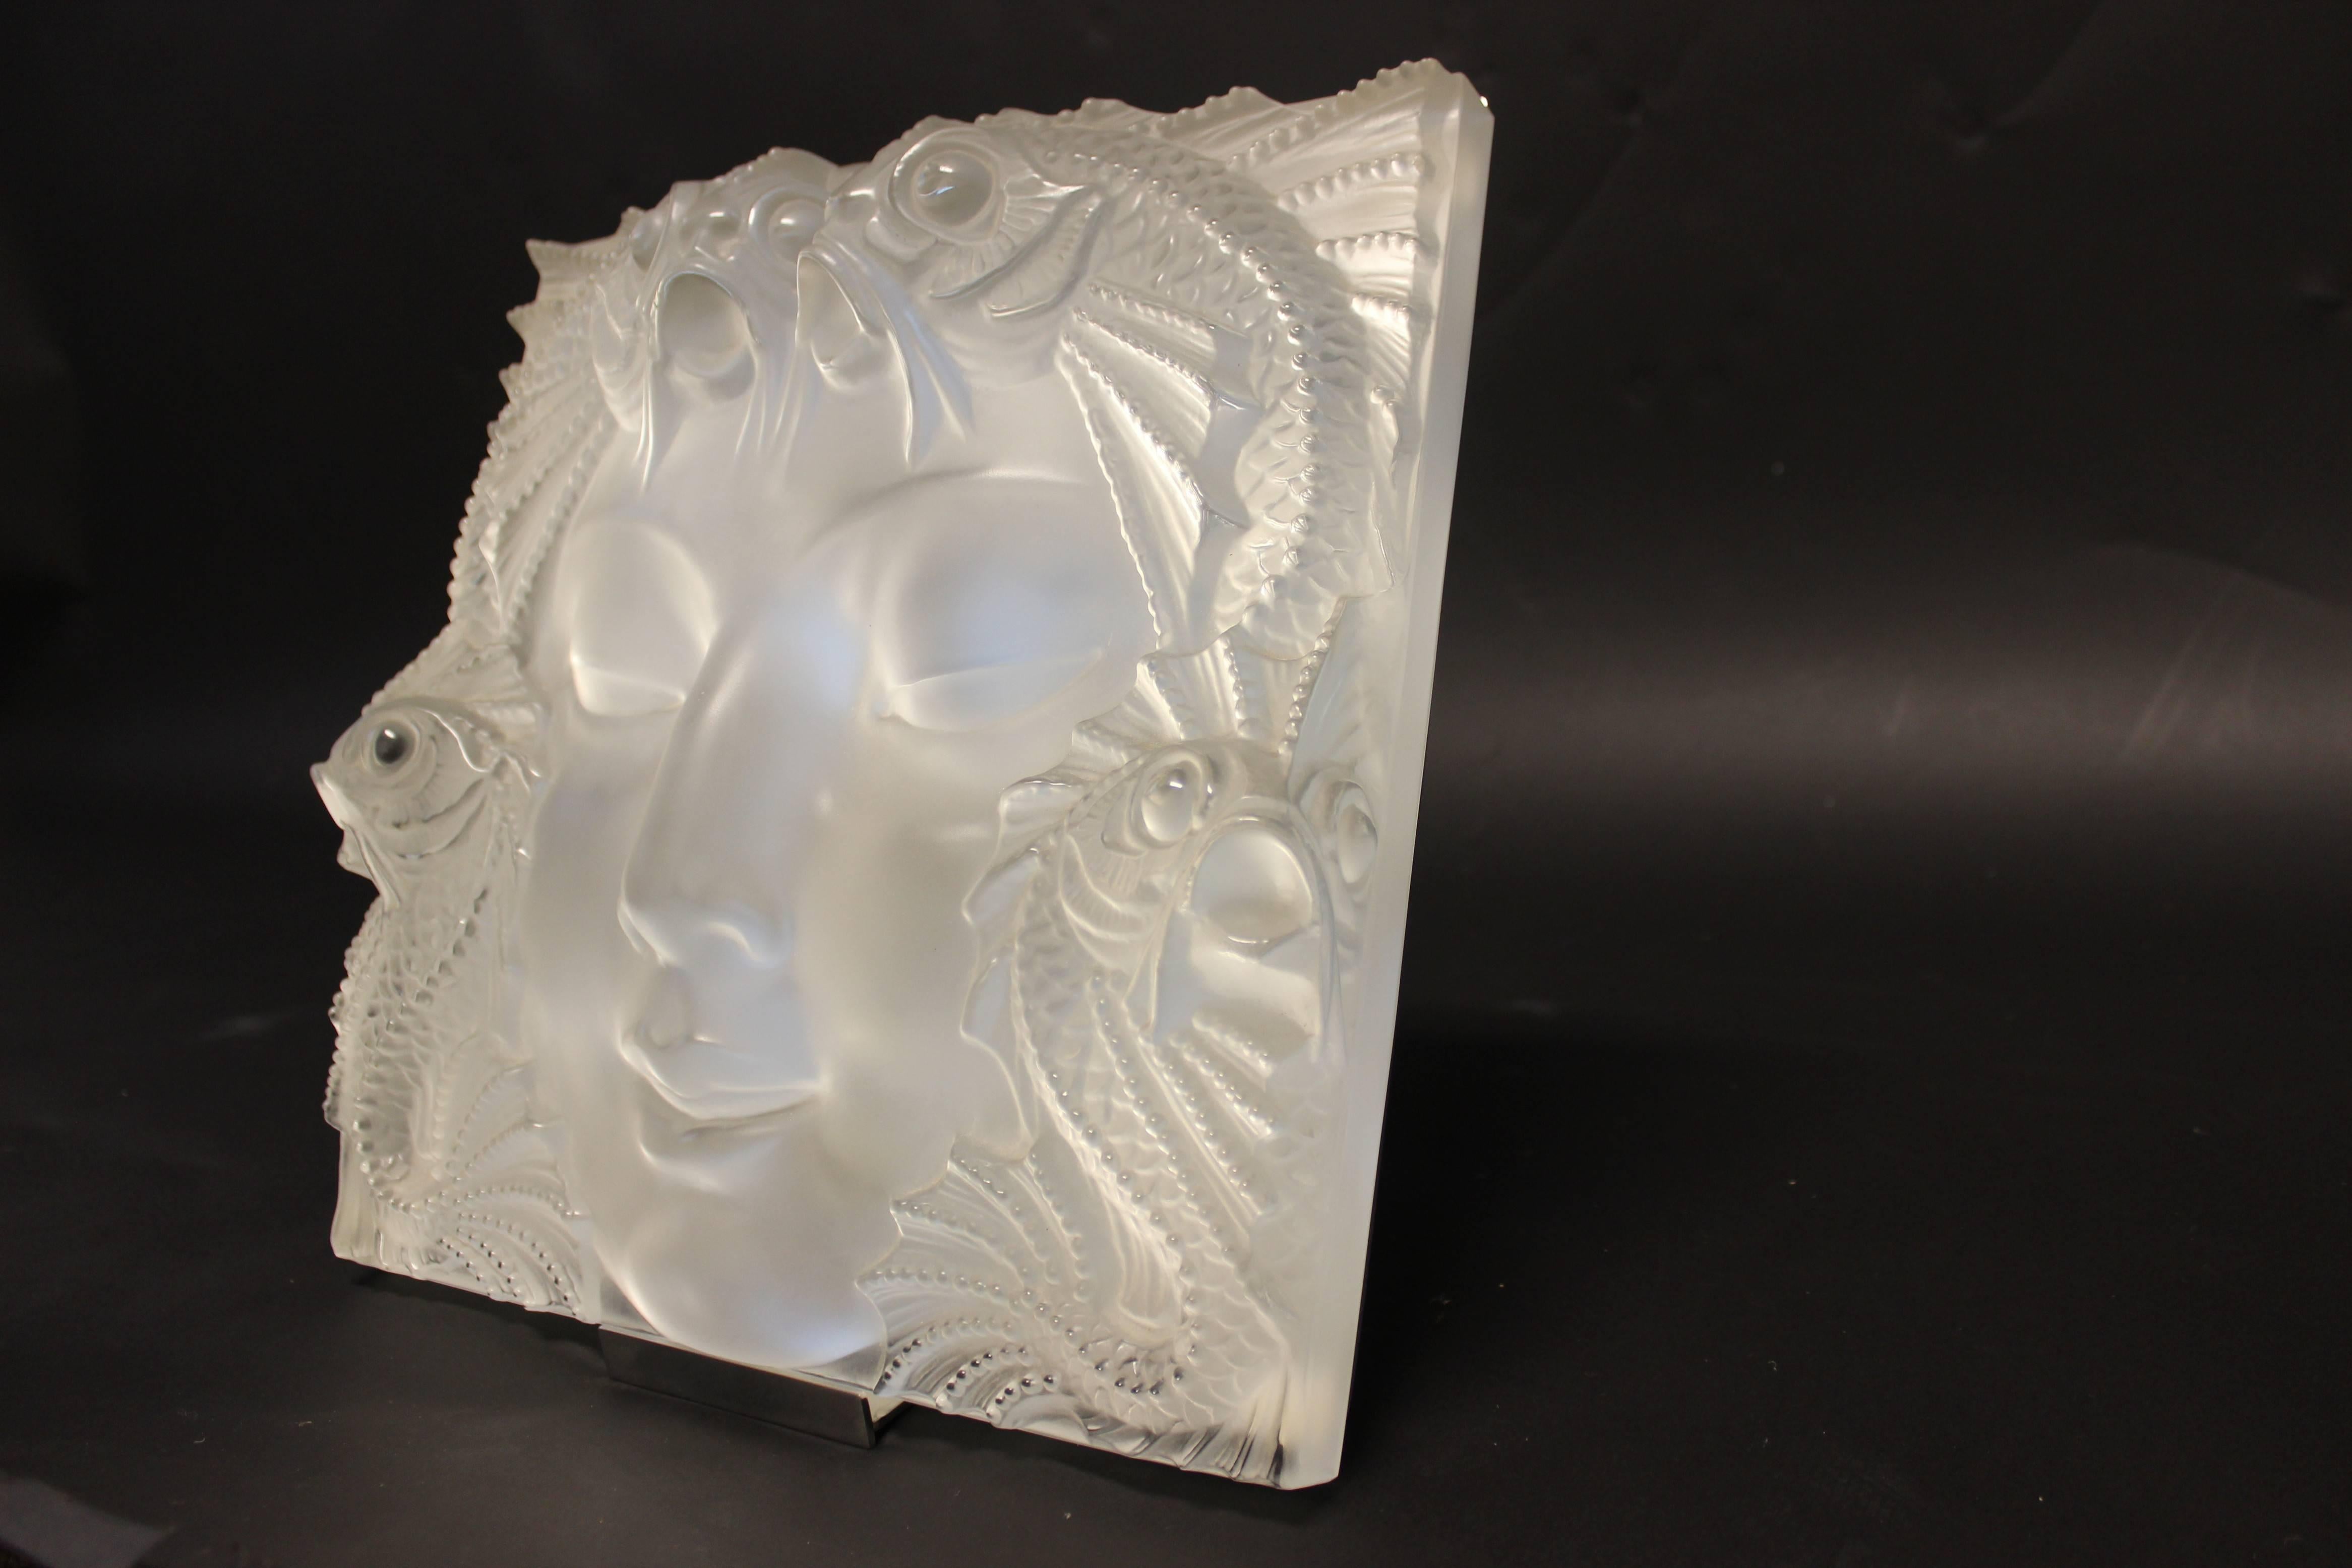 Lalique frosted glass mask. This work of art depicts a woman's face surrounded by four dynamic fish, which continue on the reverse side of the mask. This masterpiece measures to be 12.5